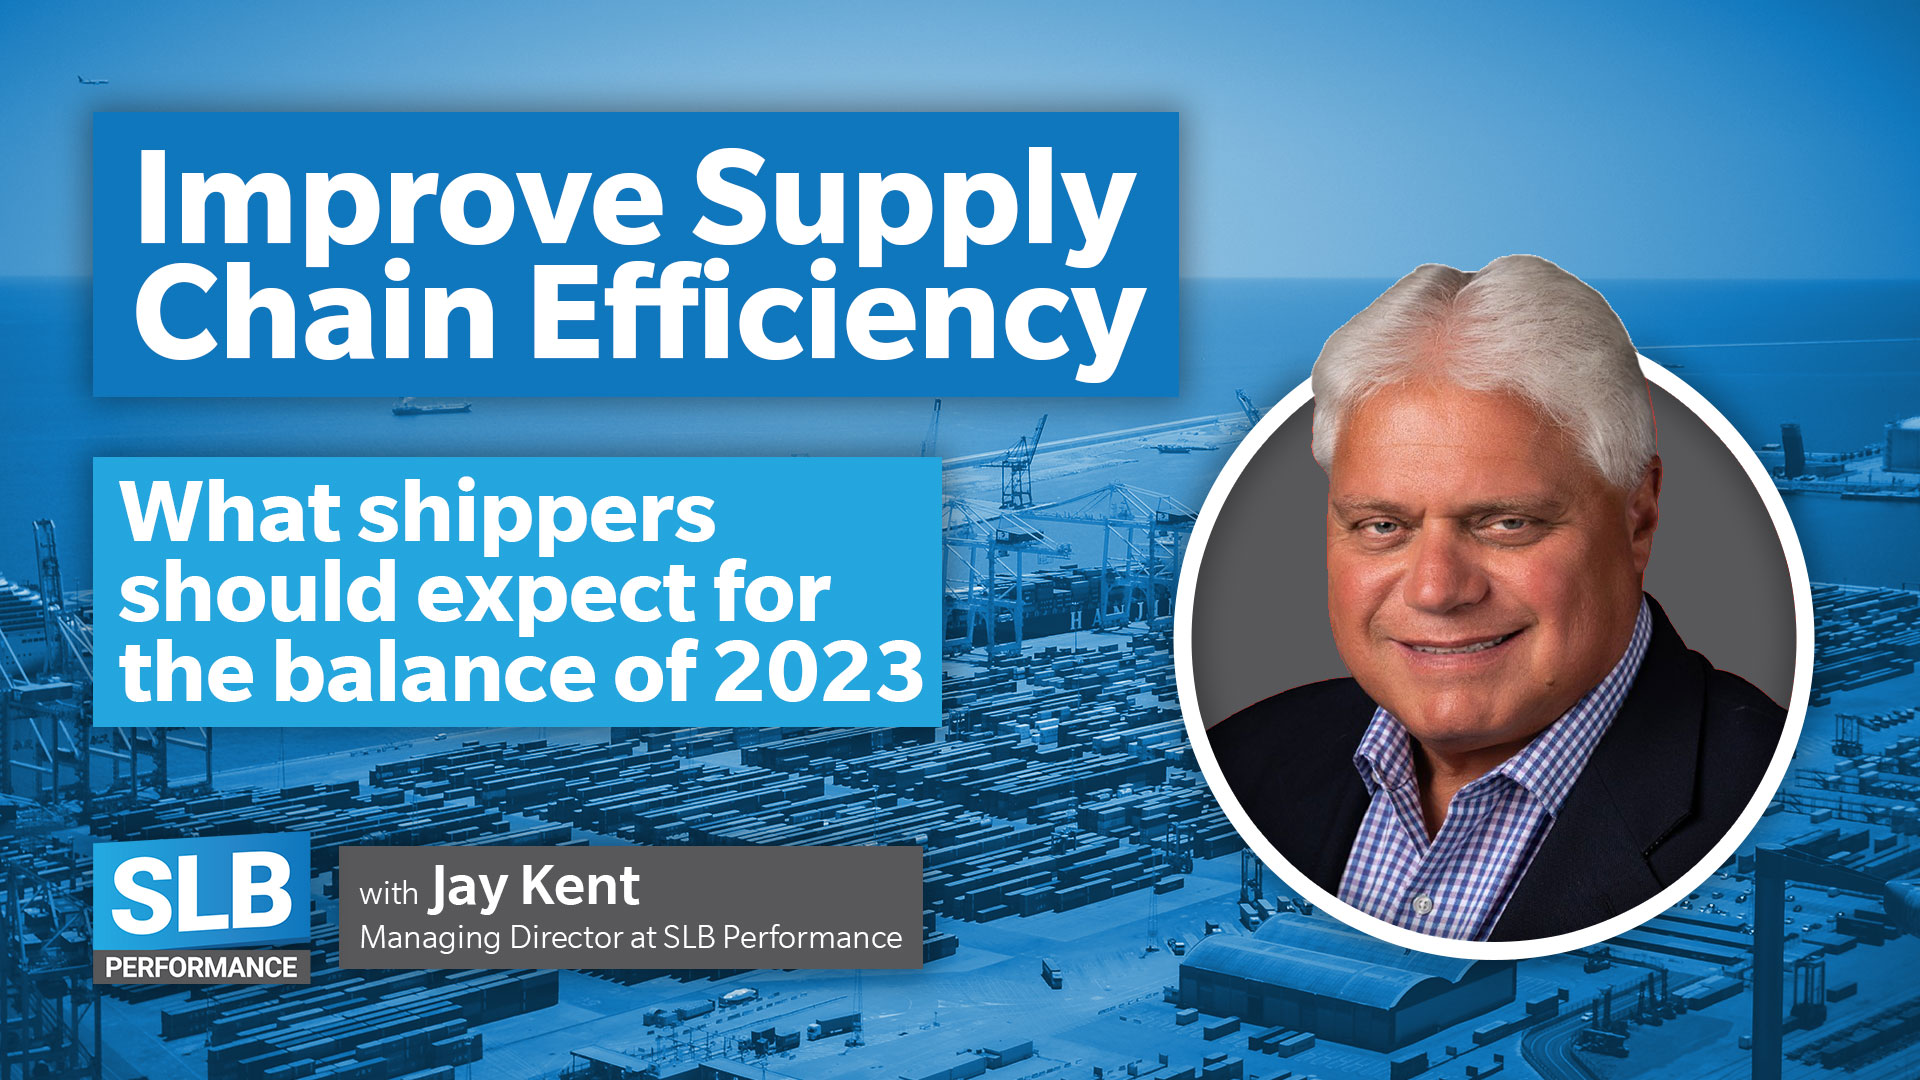 What shippers should expect for the balance of 2023